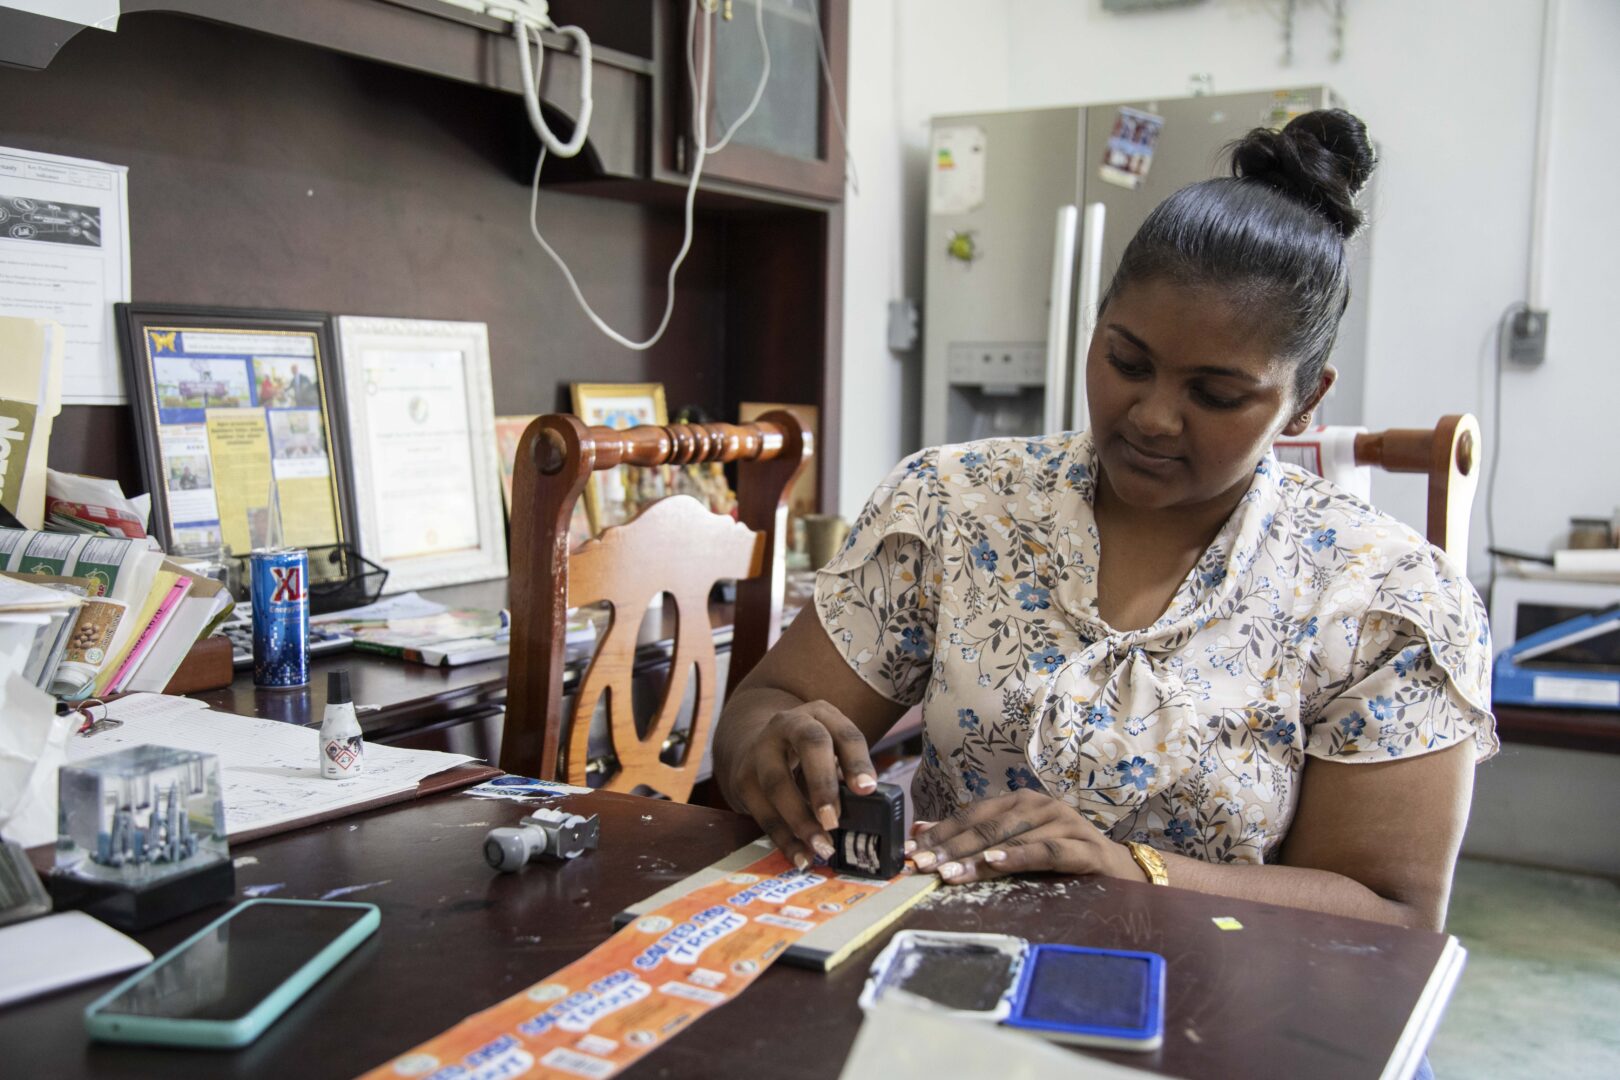 Radhika Basdeo, a Guyanese woman of south Asian heritage, sits at a desk in her office. Her hair is up in a bun and she is wearing a floral blouse. She is date-stamping a batch of labels by hand.